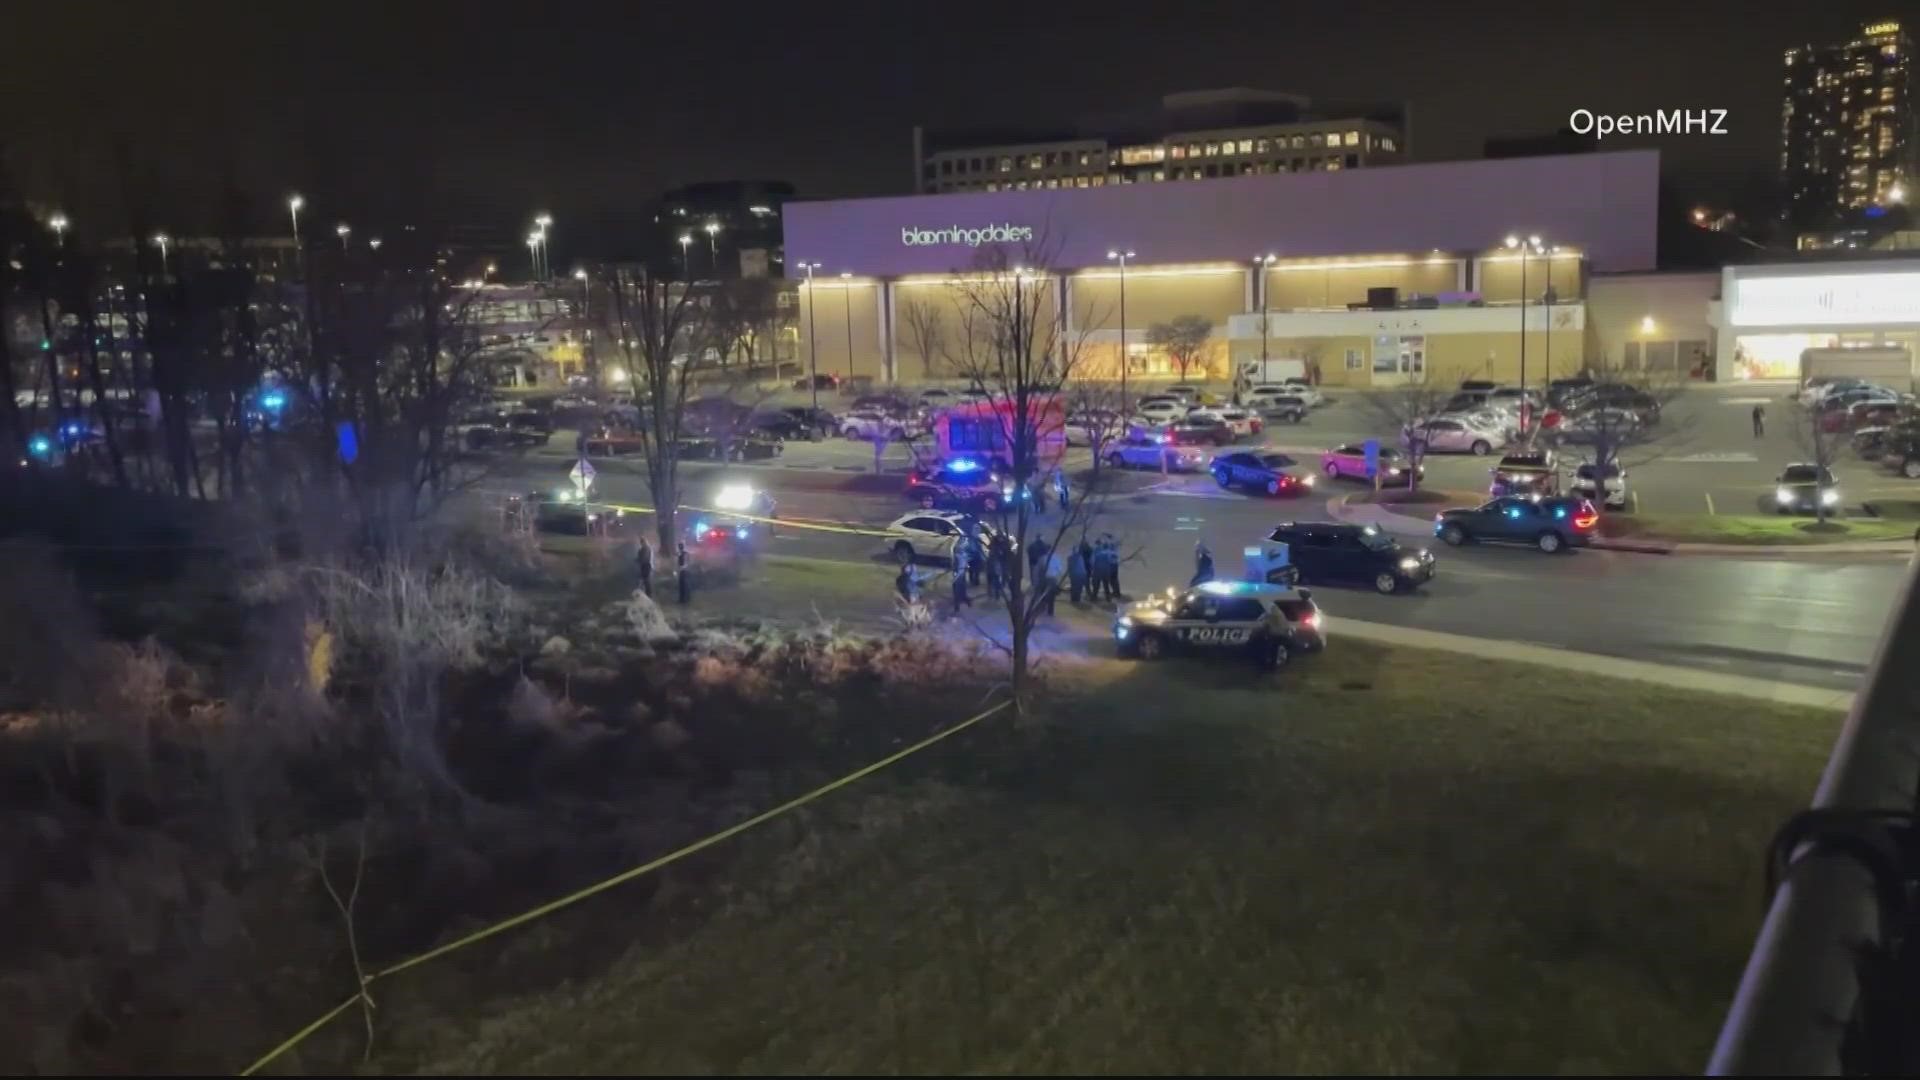 Police in Fairfax County shot and killed a suspected shoplifter on Wednesday evening after a foot chase outside Tysons Corner Mall, the police chief said.